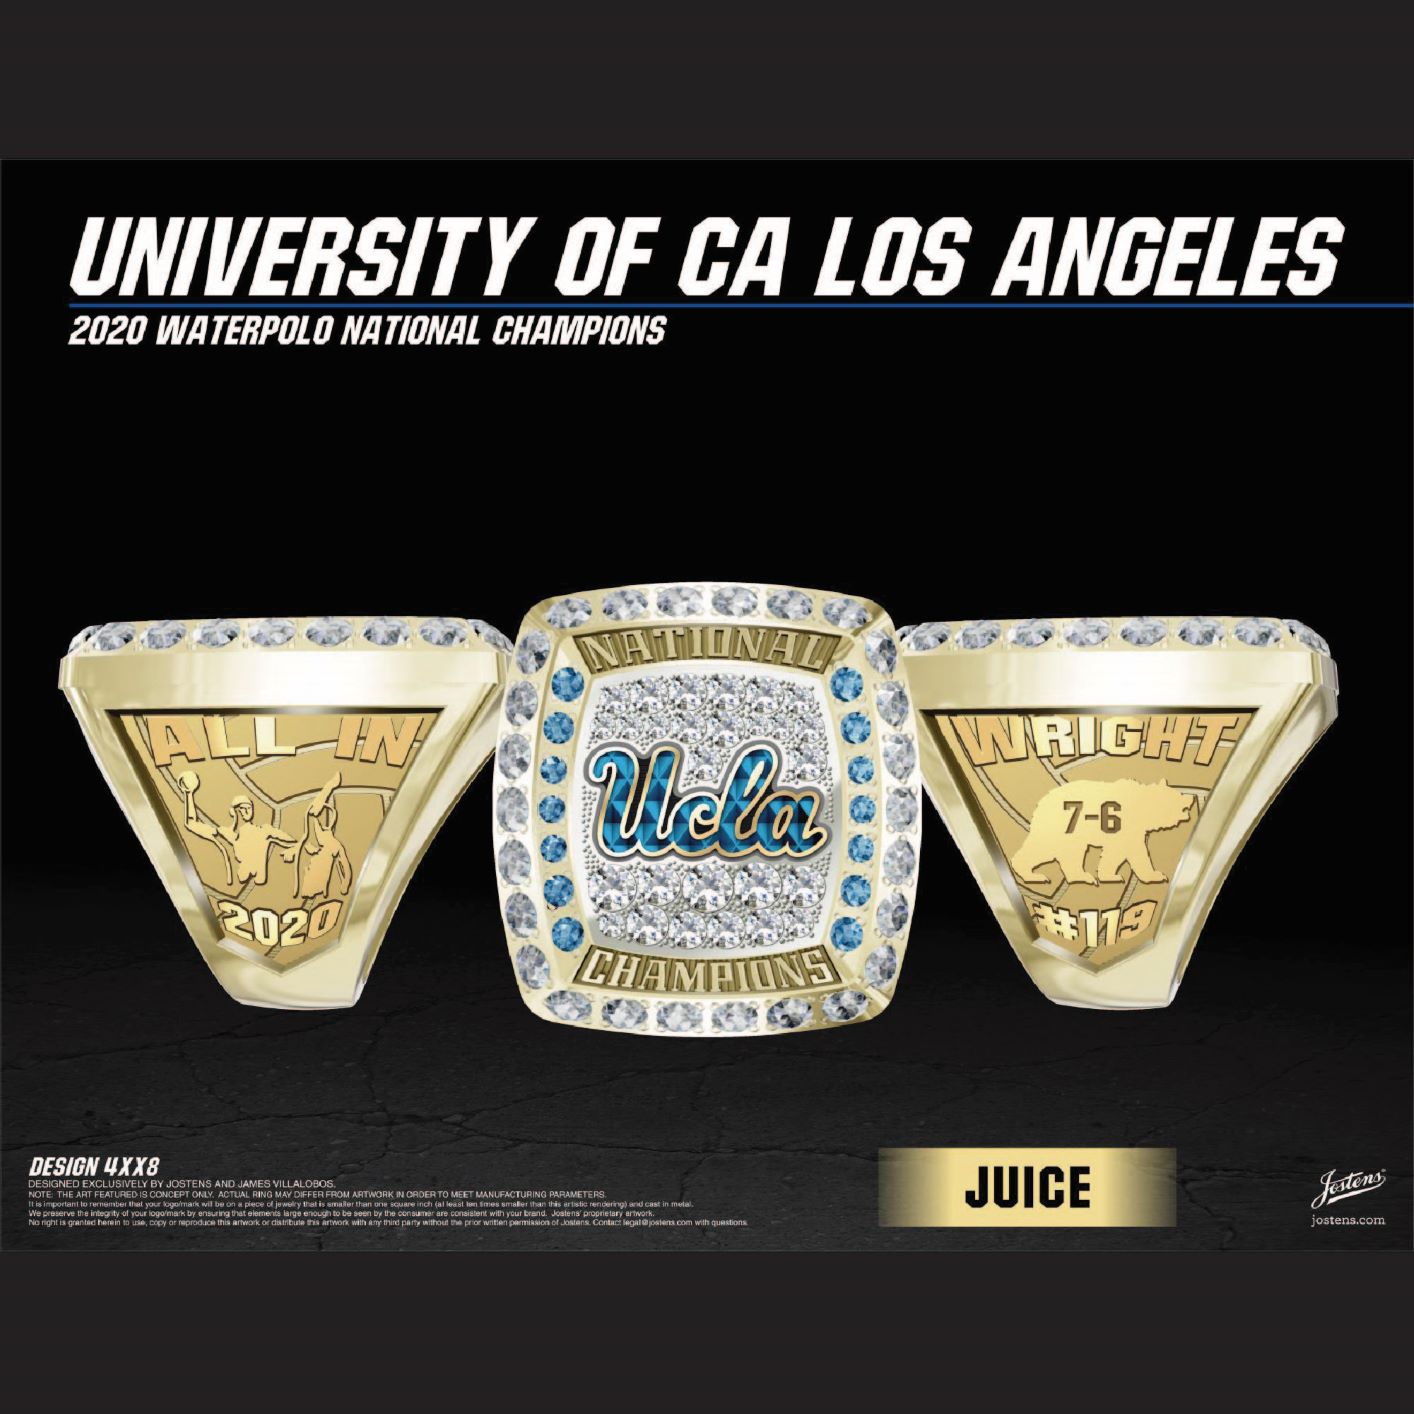 University of California Los Angeles Men's Water Polo 2020 National Championship Ring